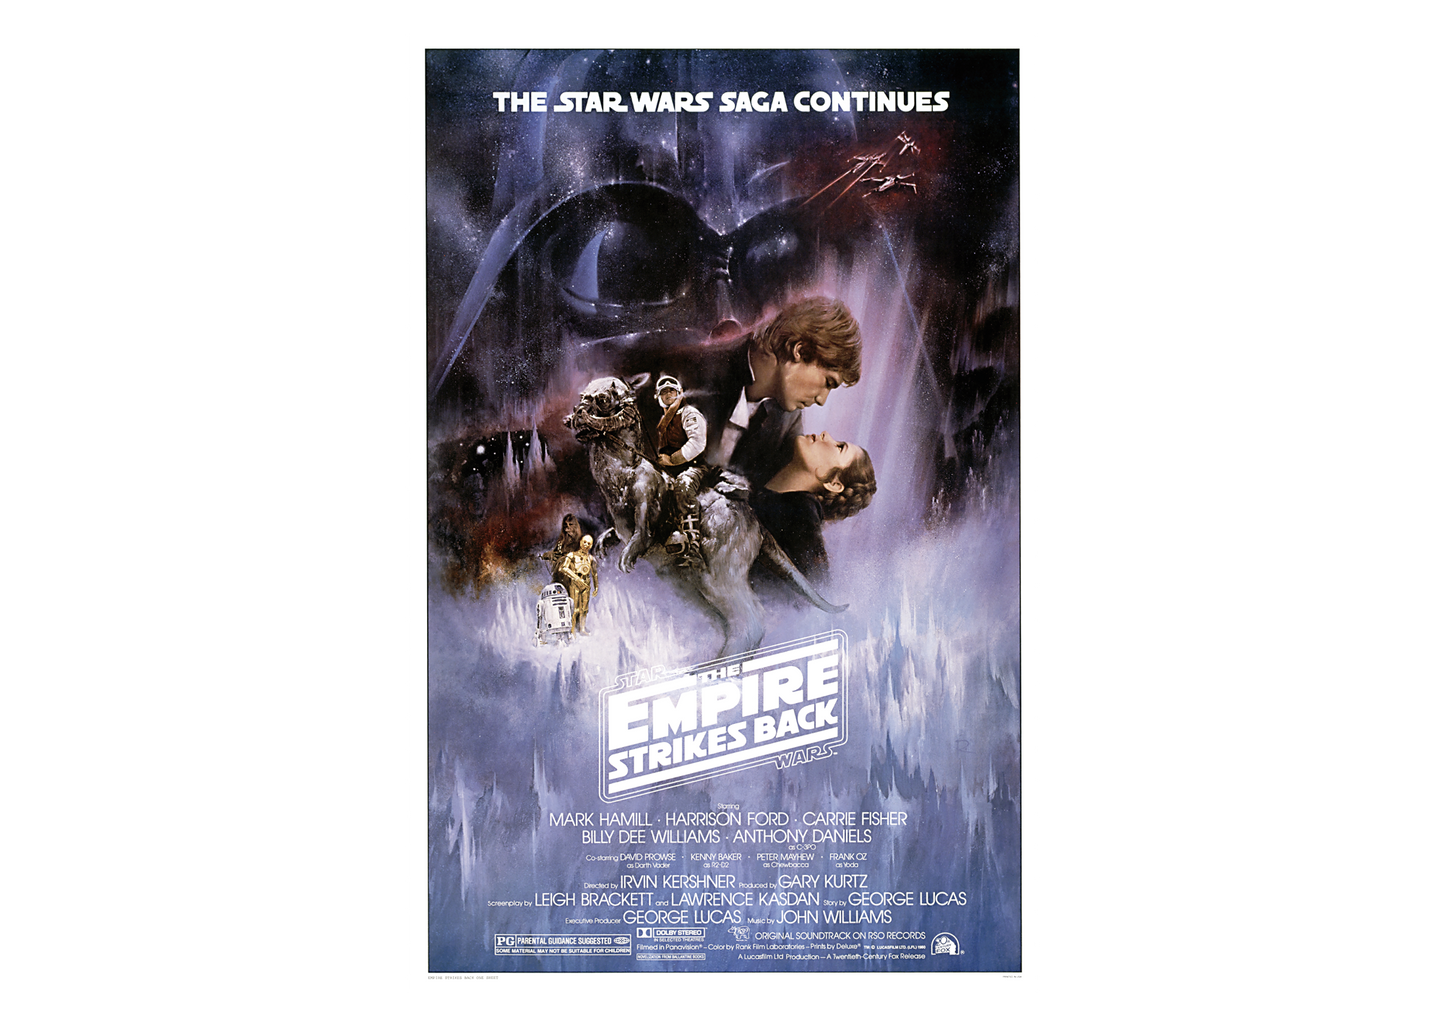 Star Wars: The Empire Strikes Back Movie Poster        - Officially Licensed Star Wars Removable Wall   Adhesive Decal